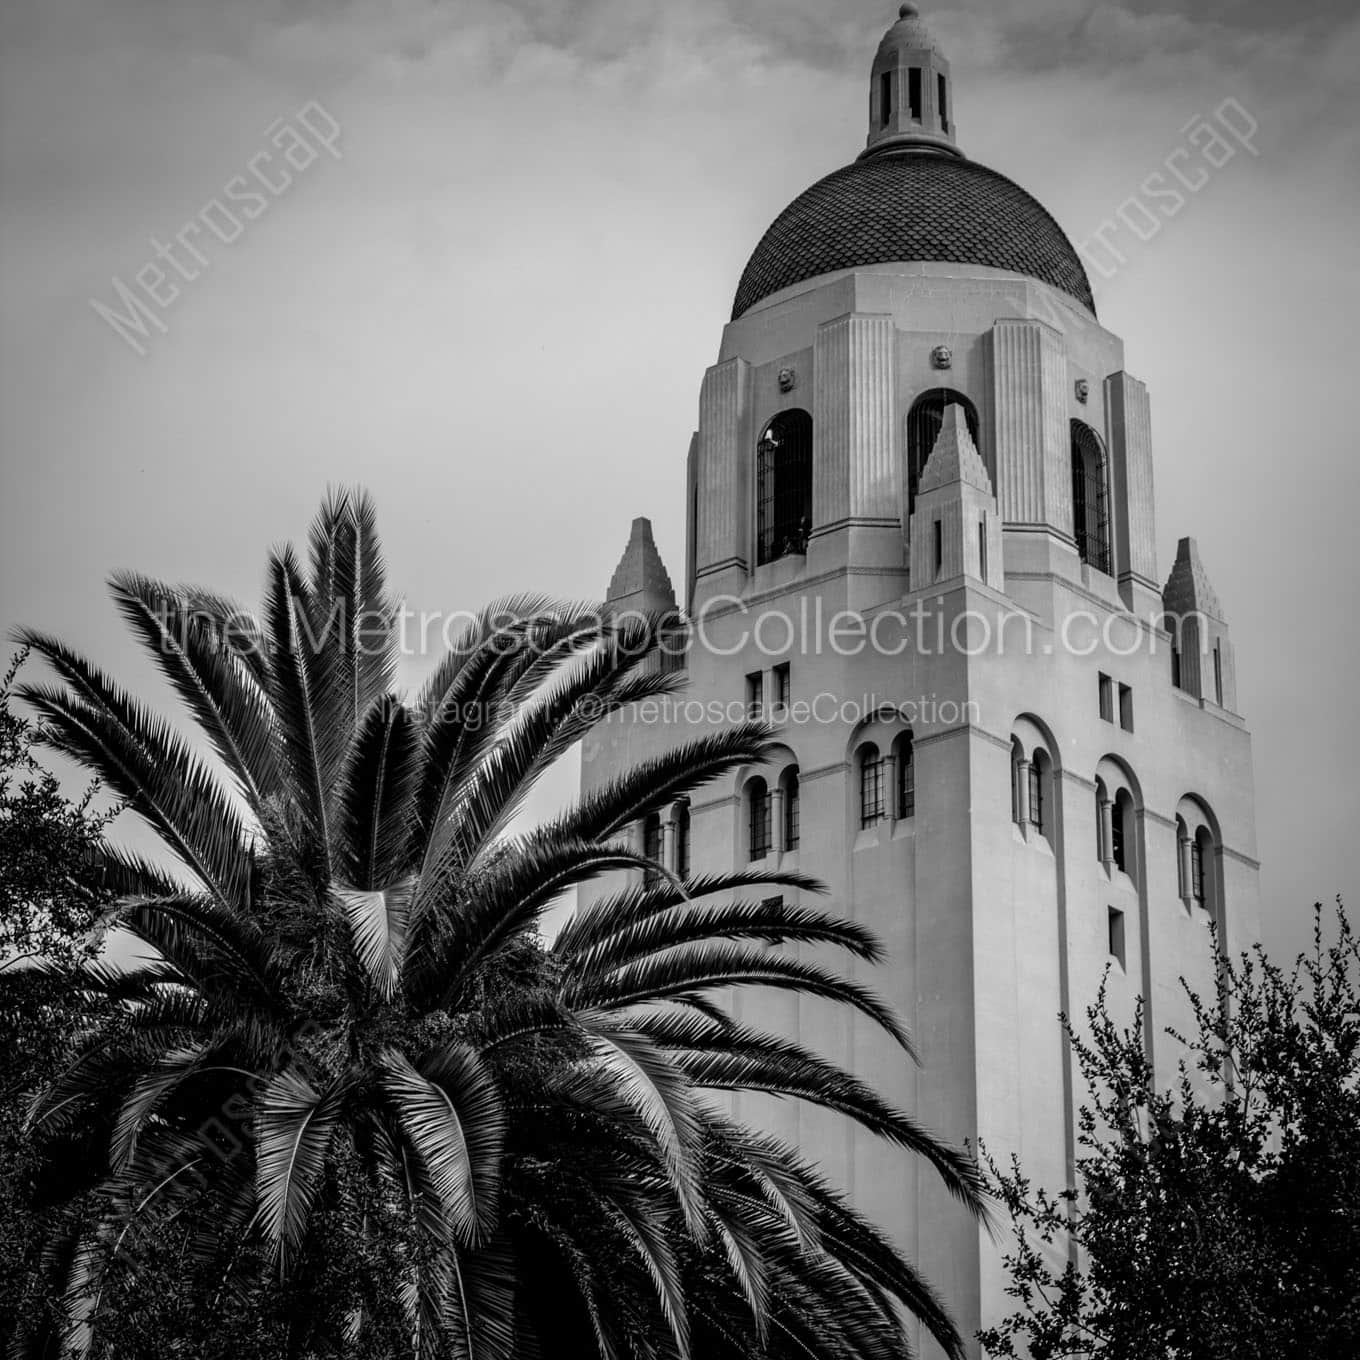 hoover tower stanford university campus Black & White Office Art